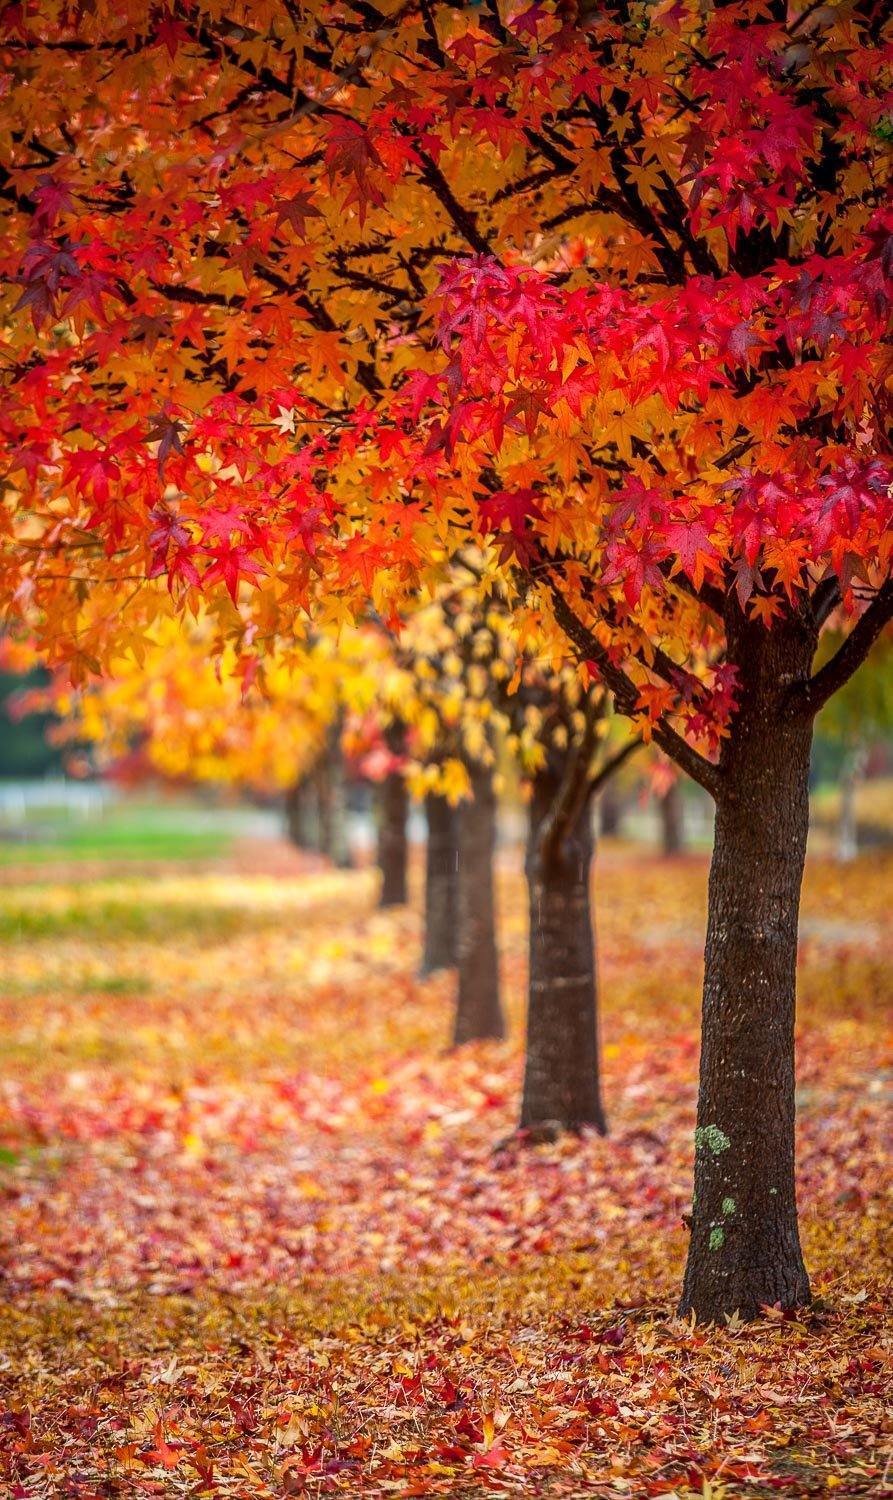 A beautiful row of orange and pinkish-colored autumn trees with countless leaves fallen on the ground, Autumn Row - Bright Victoria